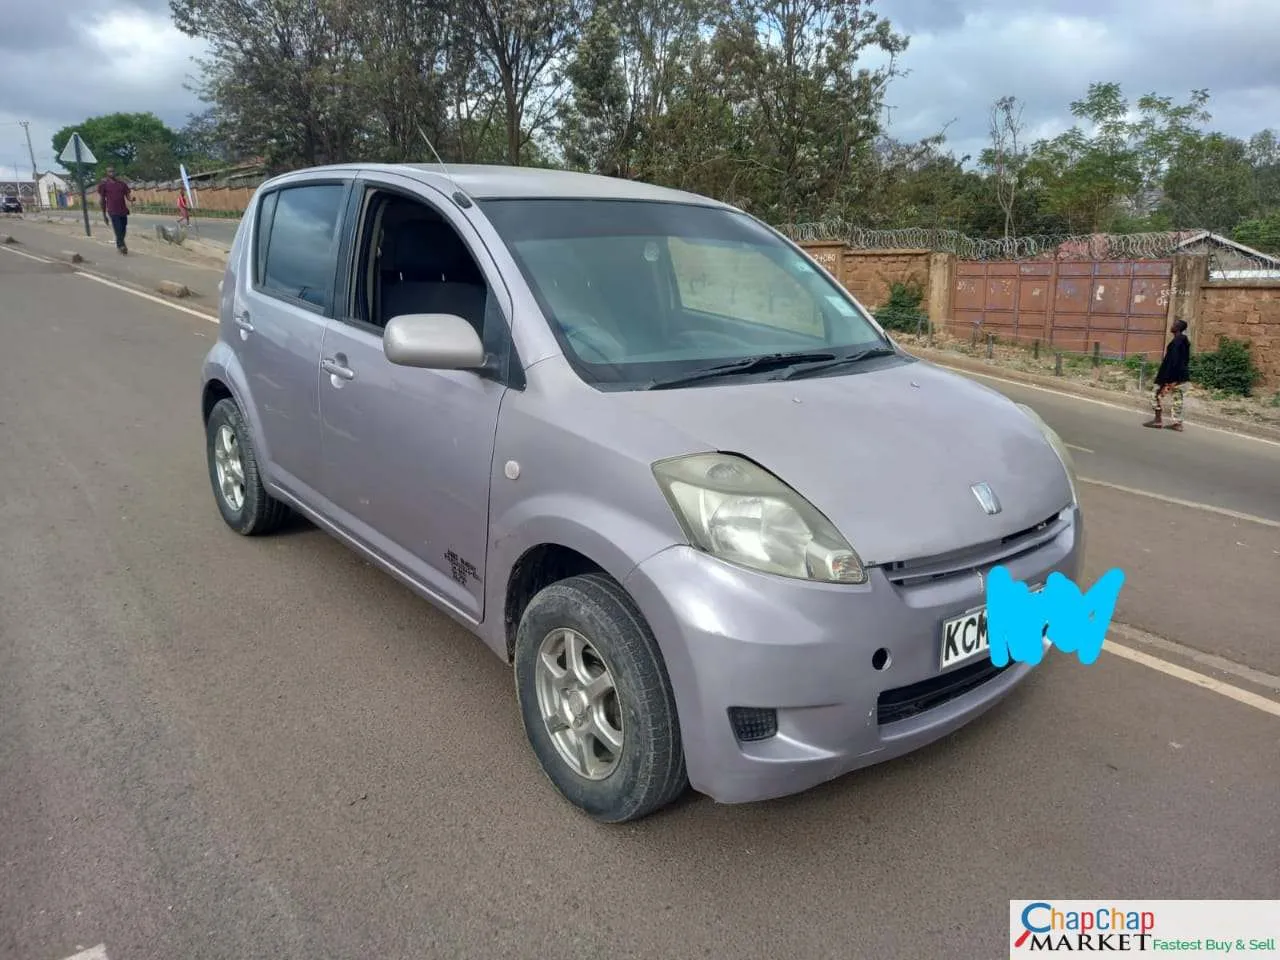 Toyota PASSO kenya KCM 370K ONLY You Pay 20% Deposit Trade in OK Toyota Passo for sale in kenya hire purchase installments EXCLUSIVE